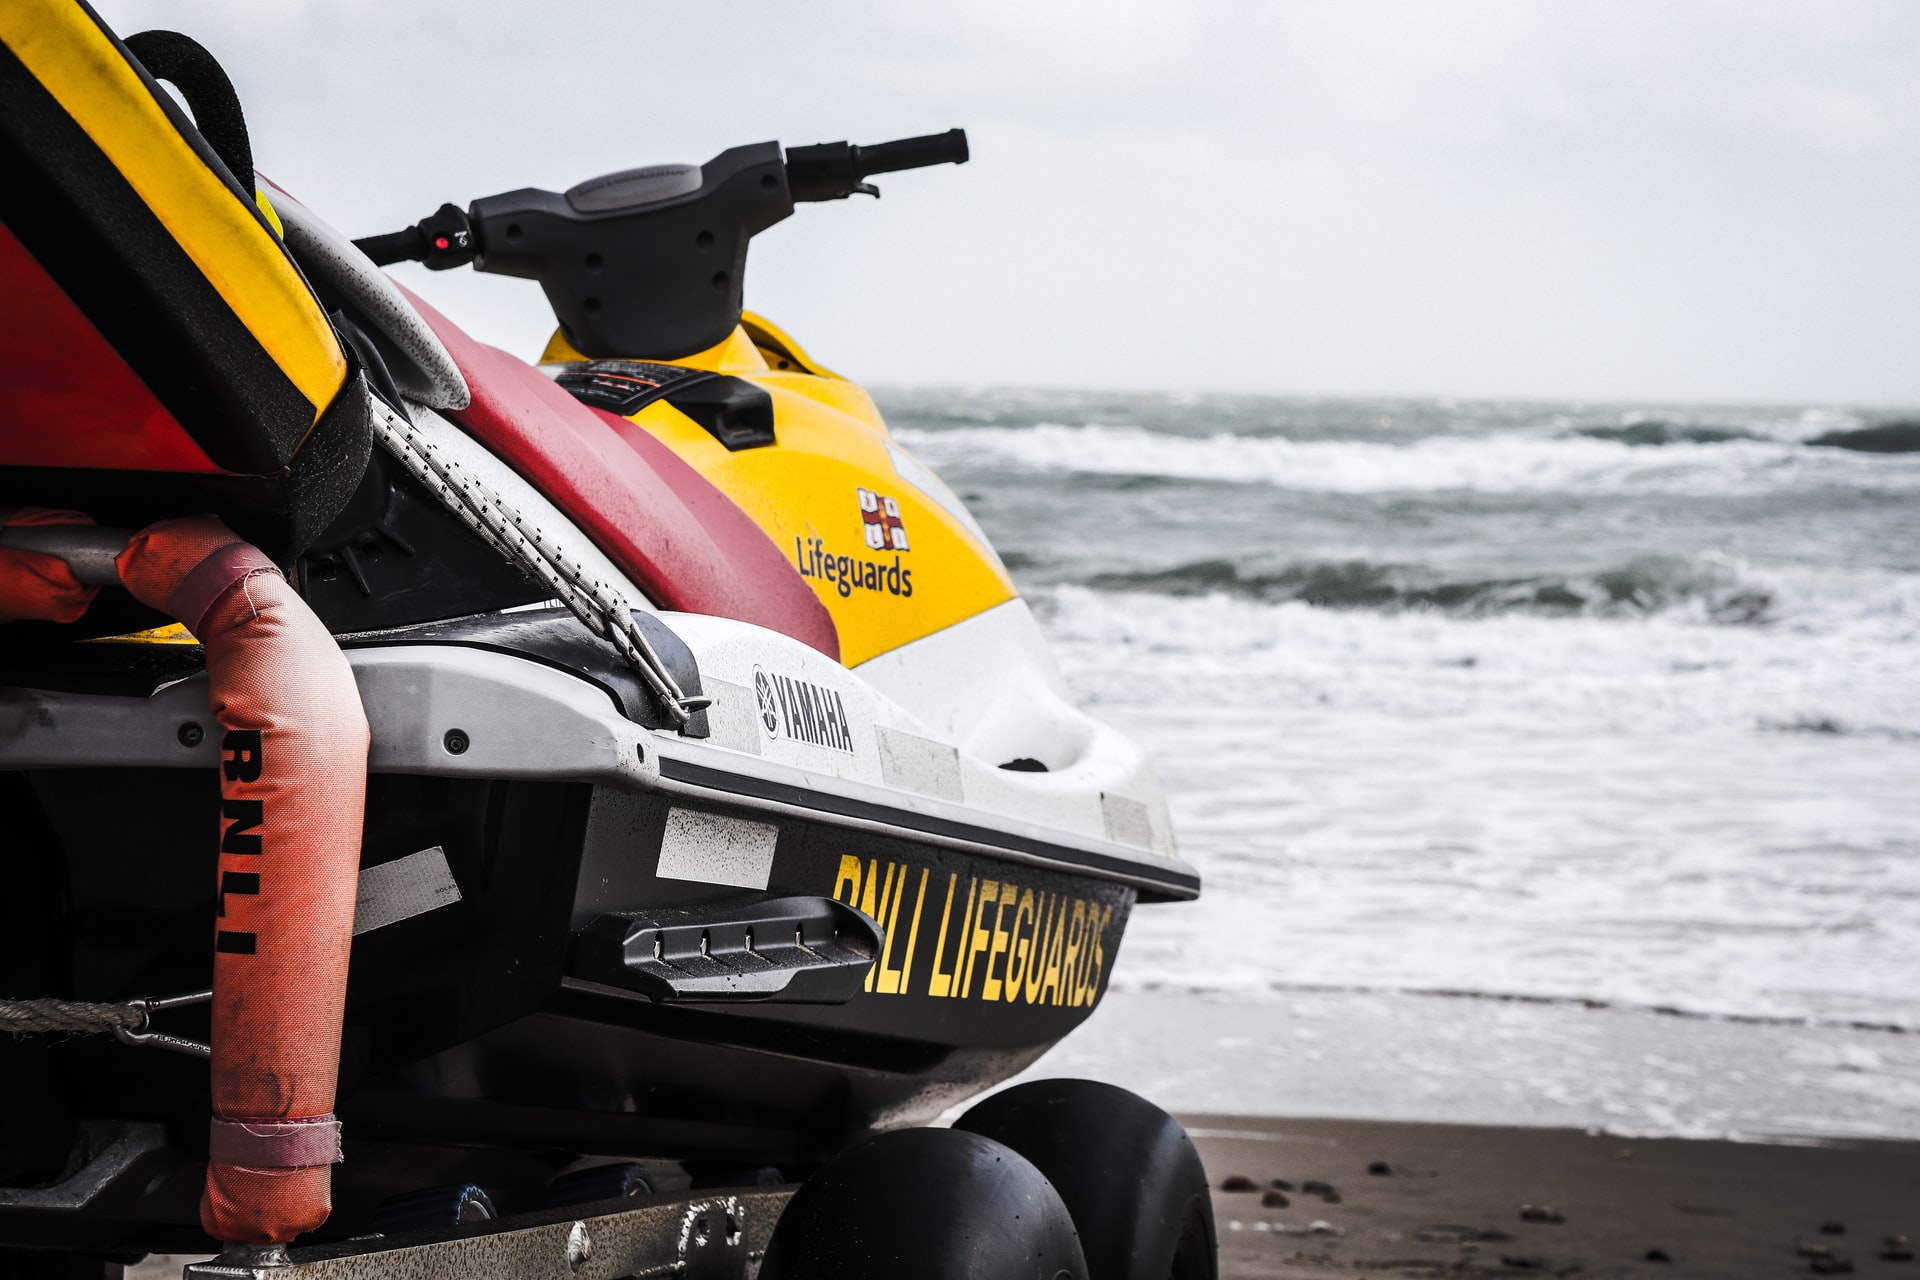 How to Winterize a Jet Ski in 10 Easy Steps